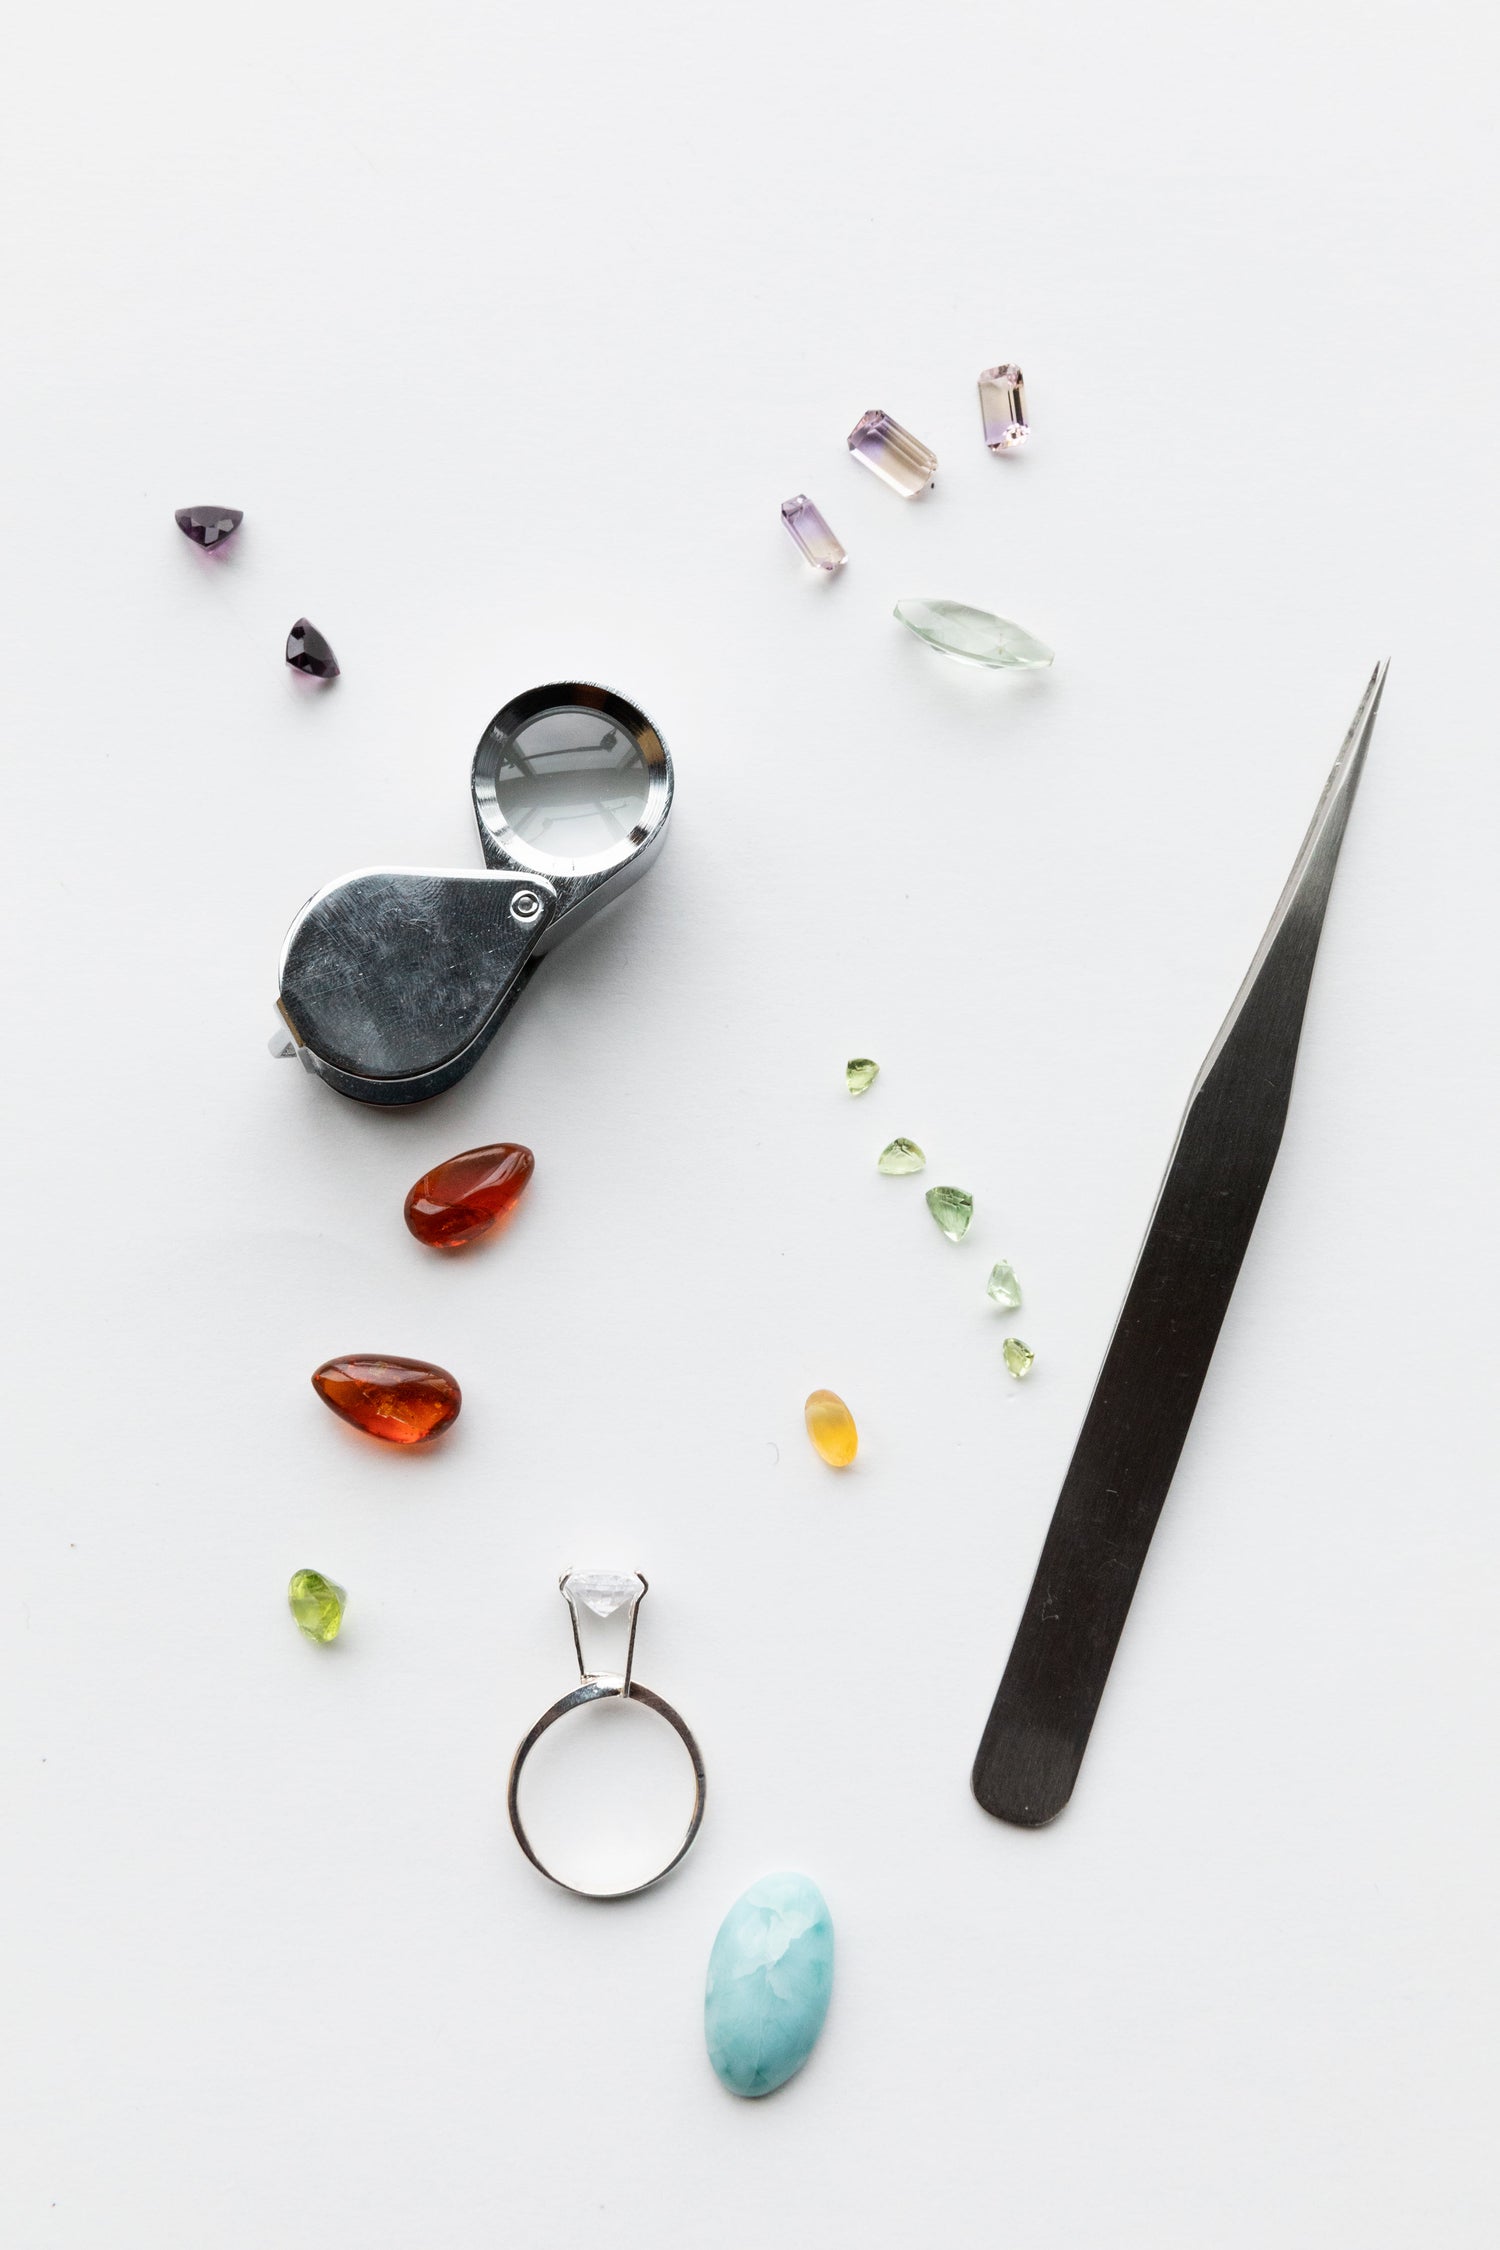 Different coloured gemstones, a ring, a loupe, and a tweezer